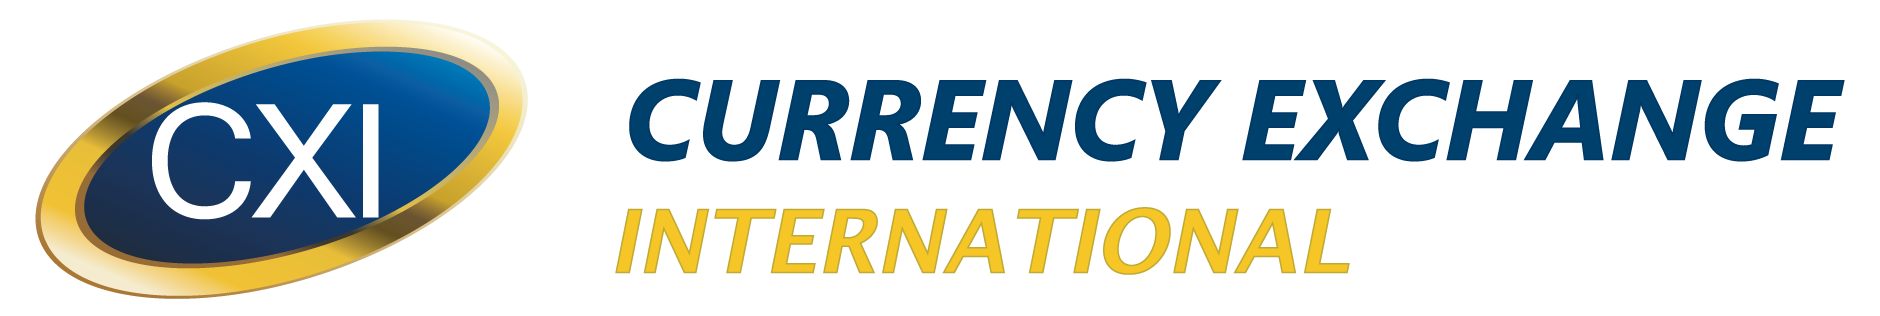 Currency Exchange International, Corp. - A Leading Provider of Foreign  Currency Exchange Technology and Services in North America including  exchanging foreign banknotes, international wire payments, foreign check  clearing and foreign draft issuance